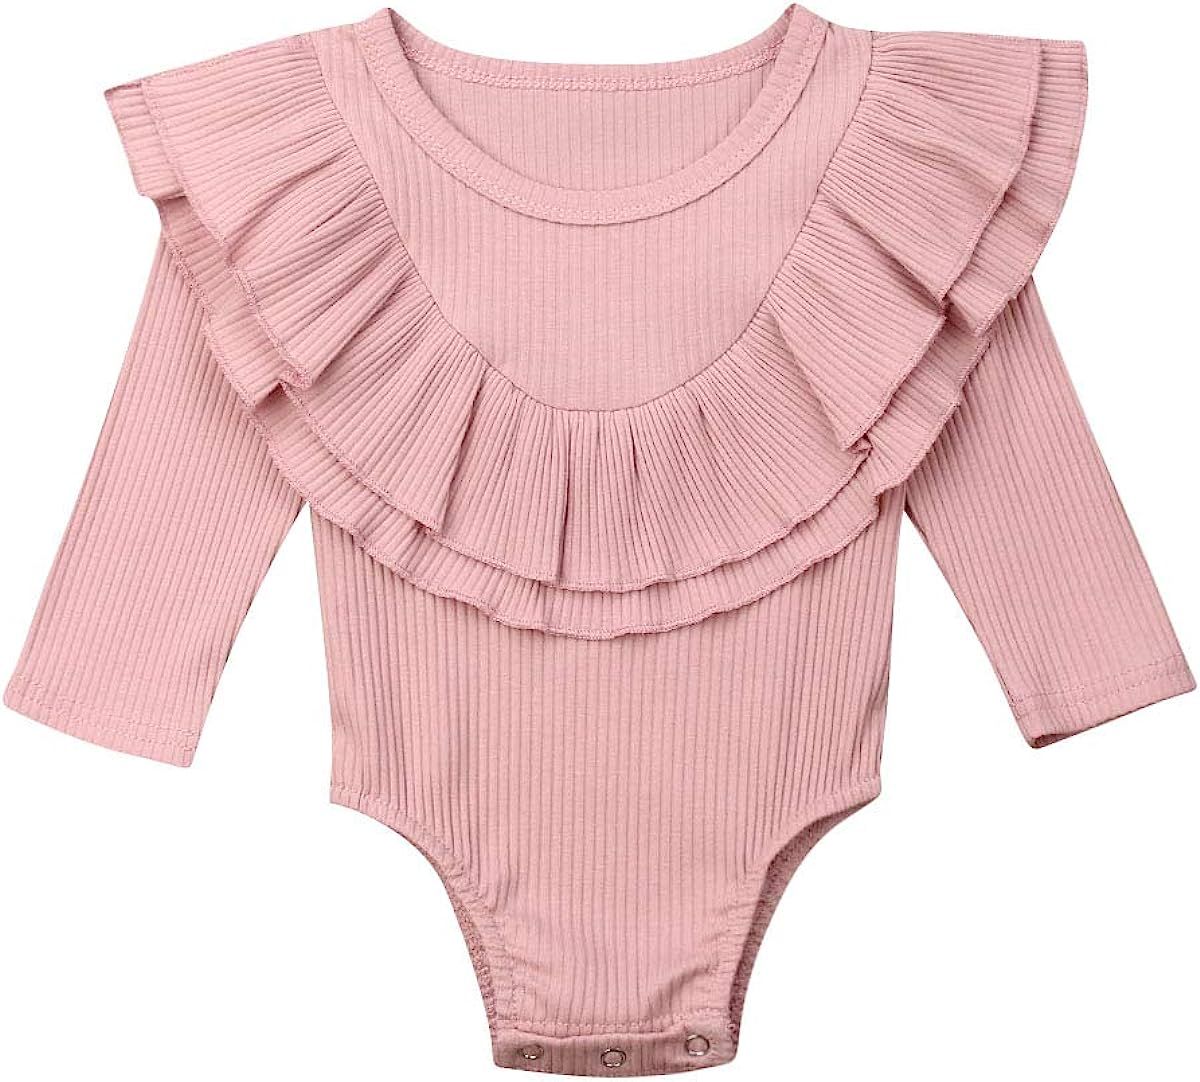 Toddler Baby Girls Ruffled Long Sleeve Cotton Solid Romper Bodysuit Jumpsuit Outfits Clothes | Amazon (US)